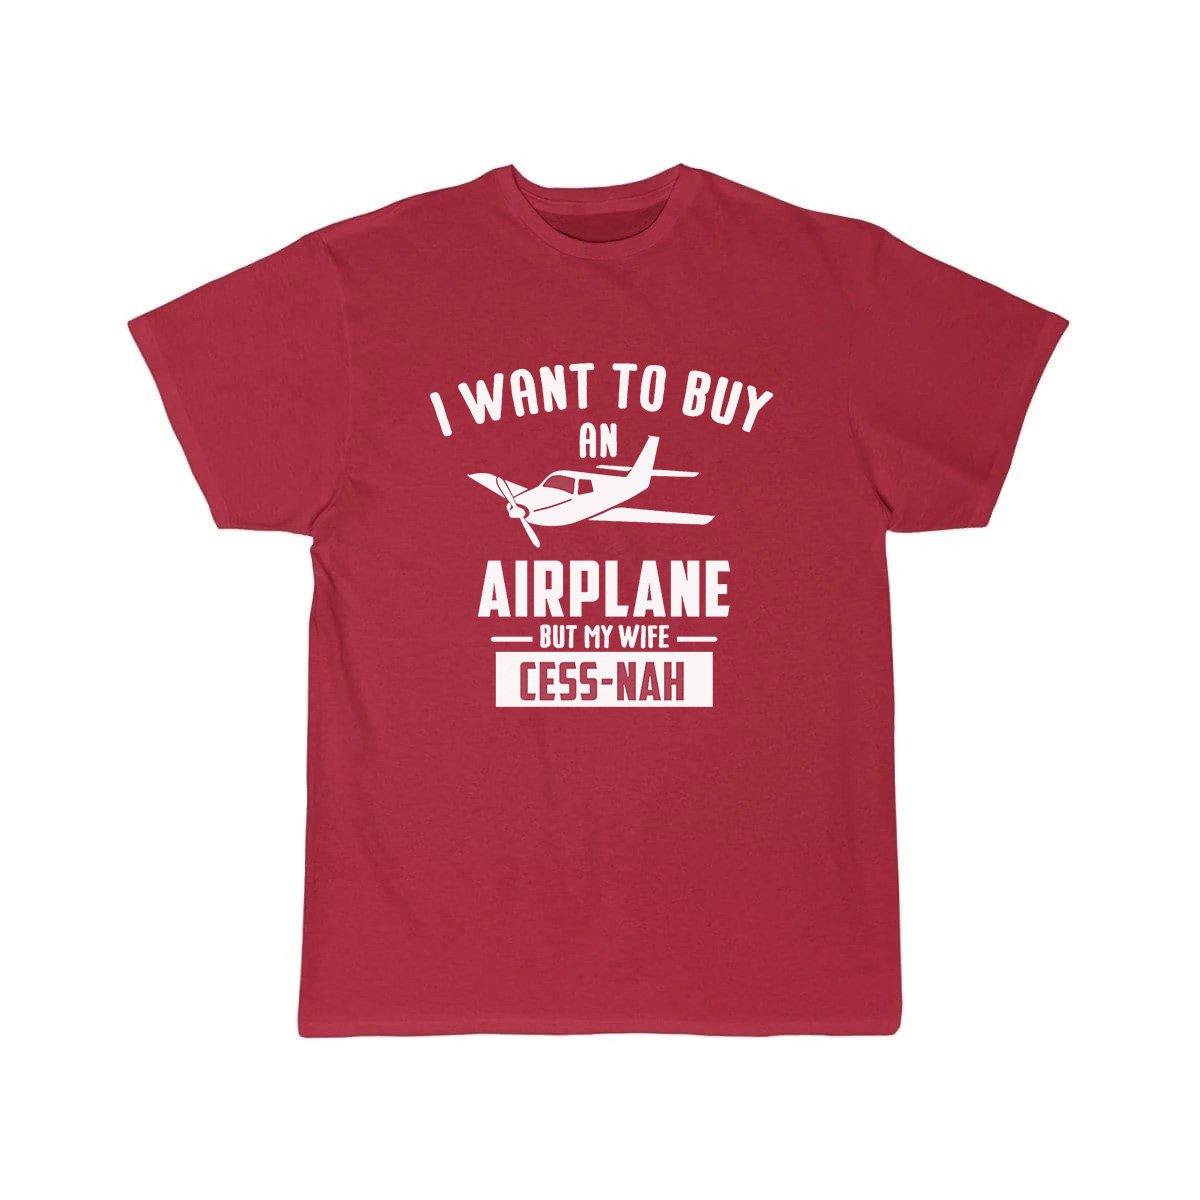 I WANT TO BUY AN AIRPLANE BUT MY WIFE CESS-NAH T SHIRT THE AV8R